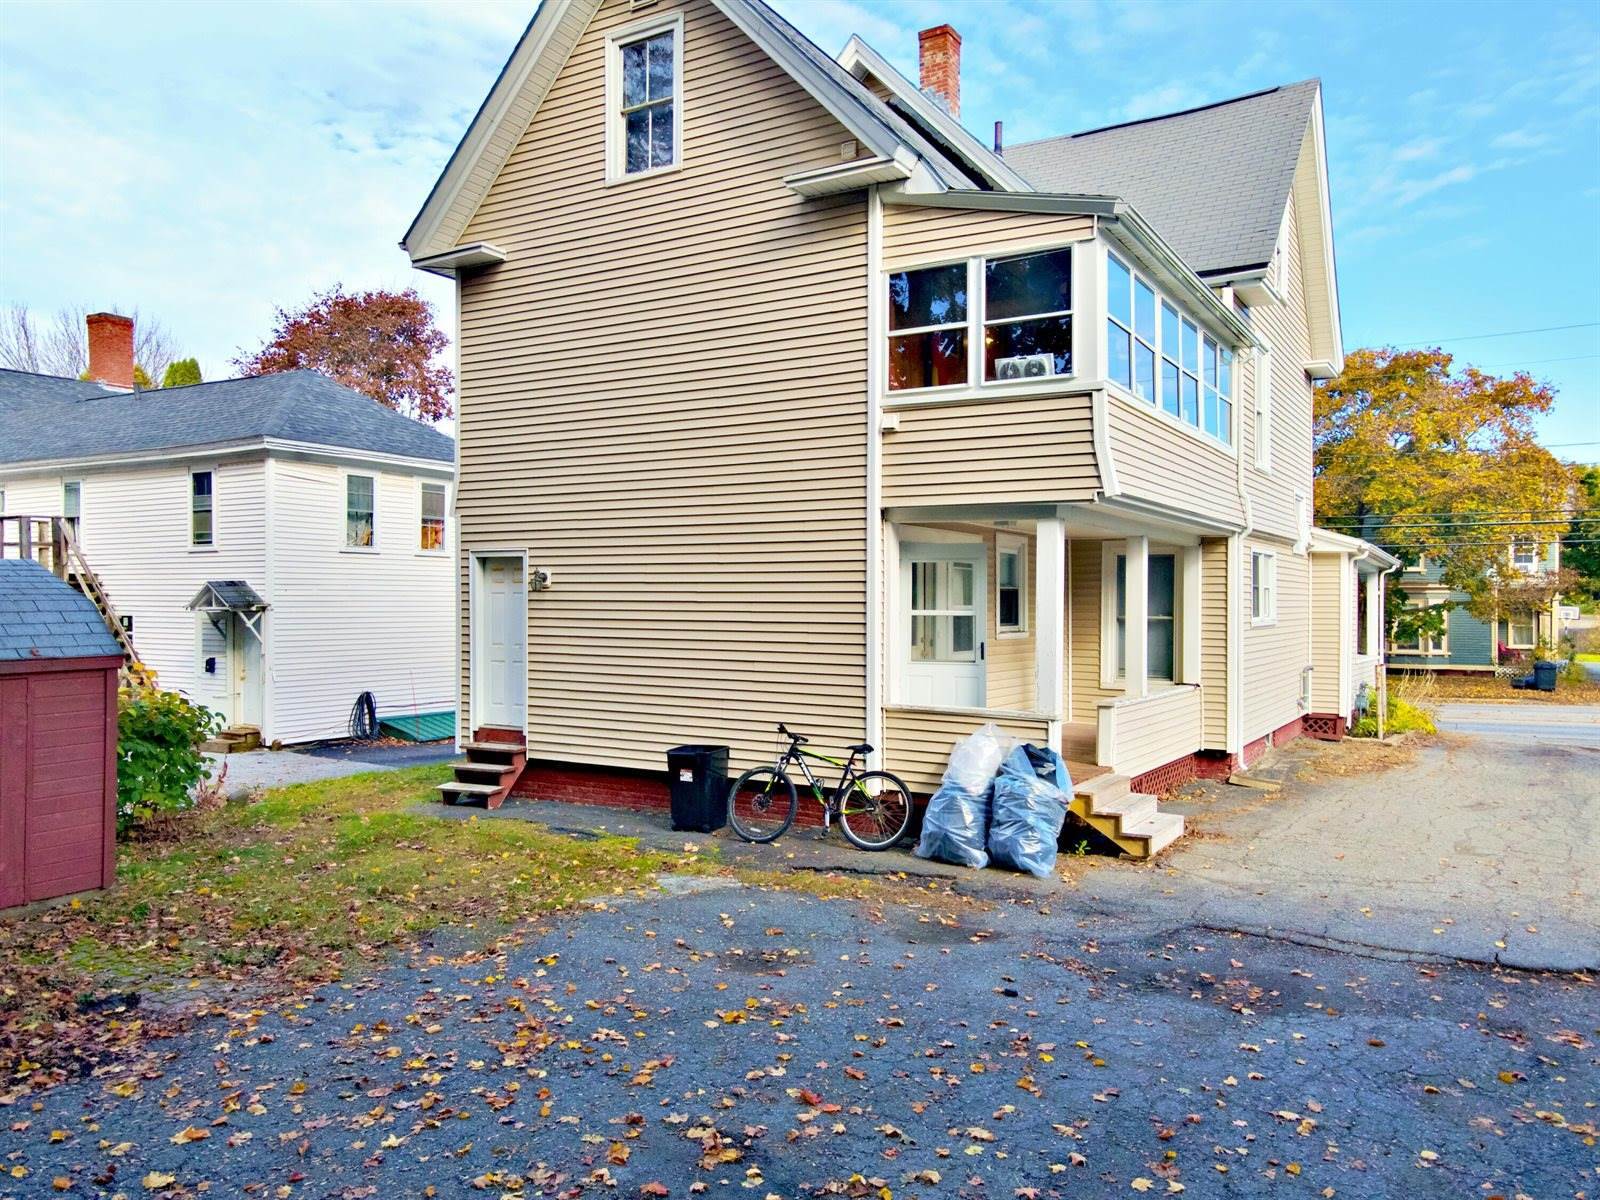 89 State Street, Brewer, ME 04412